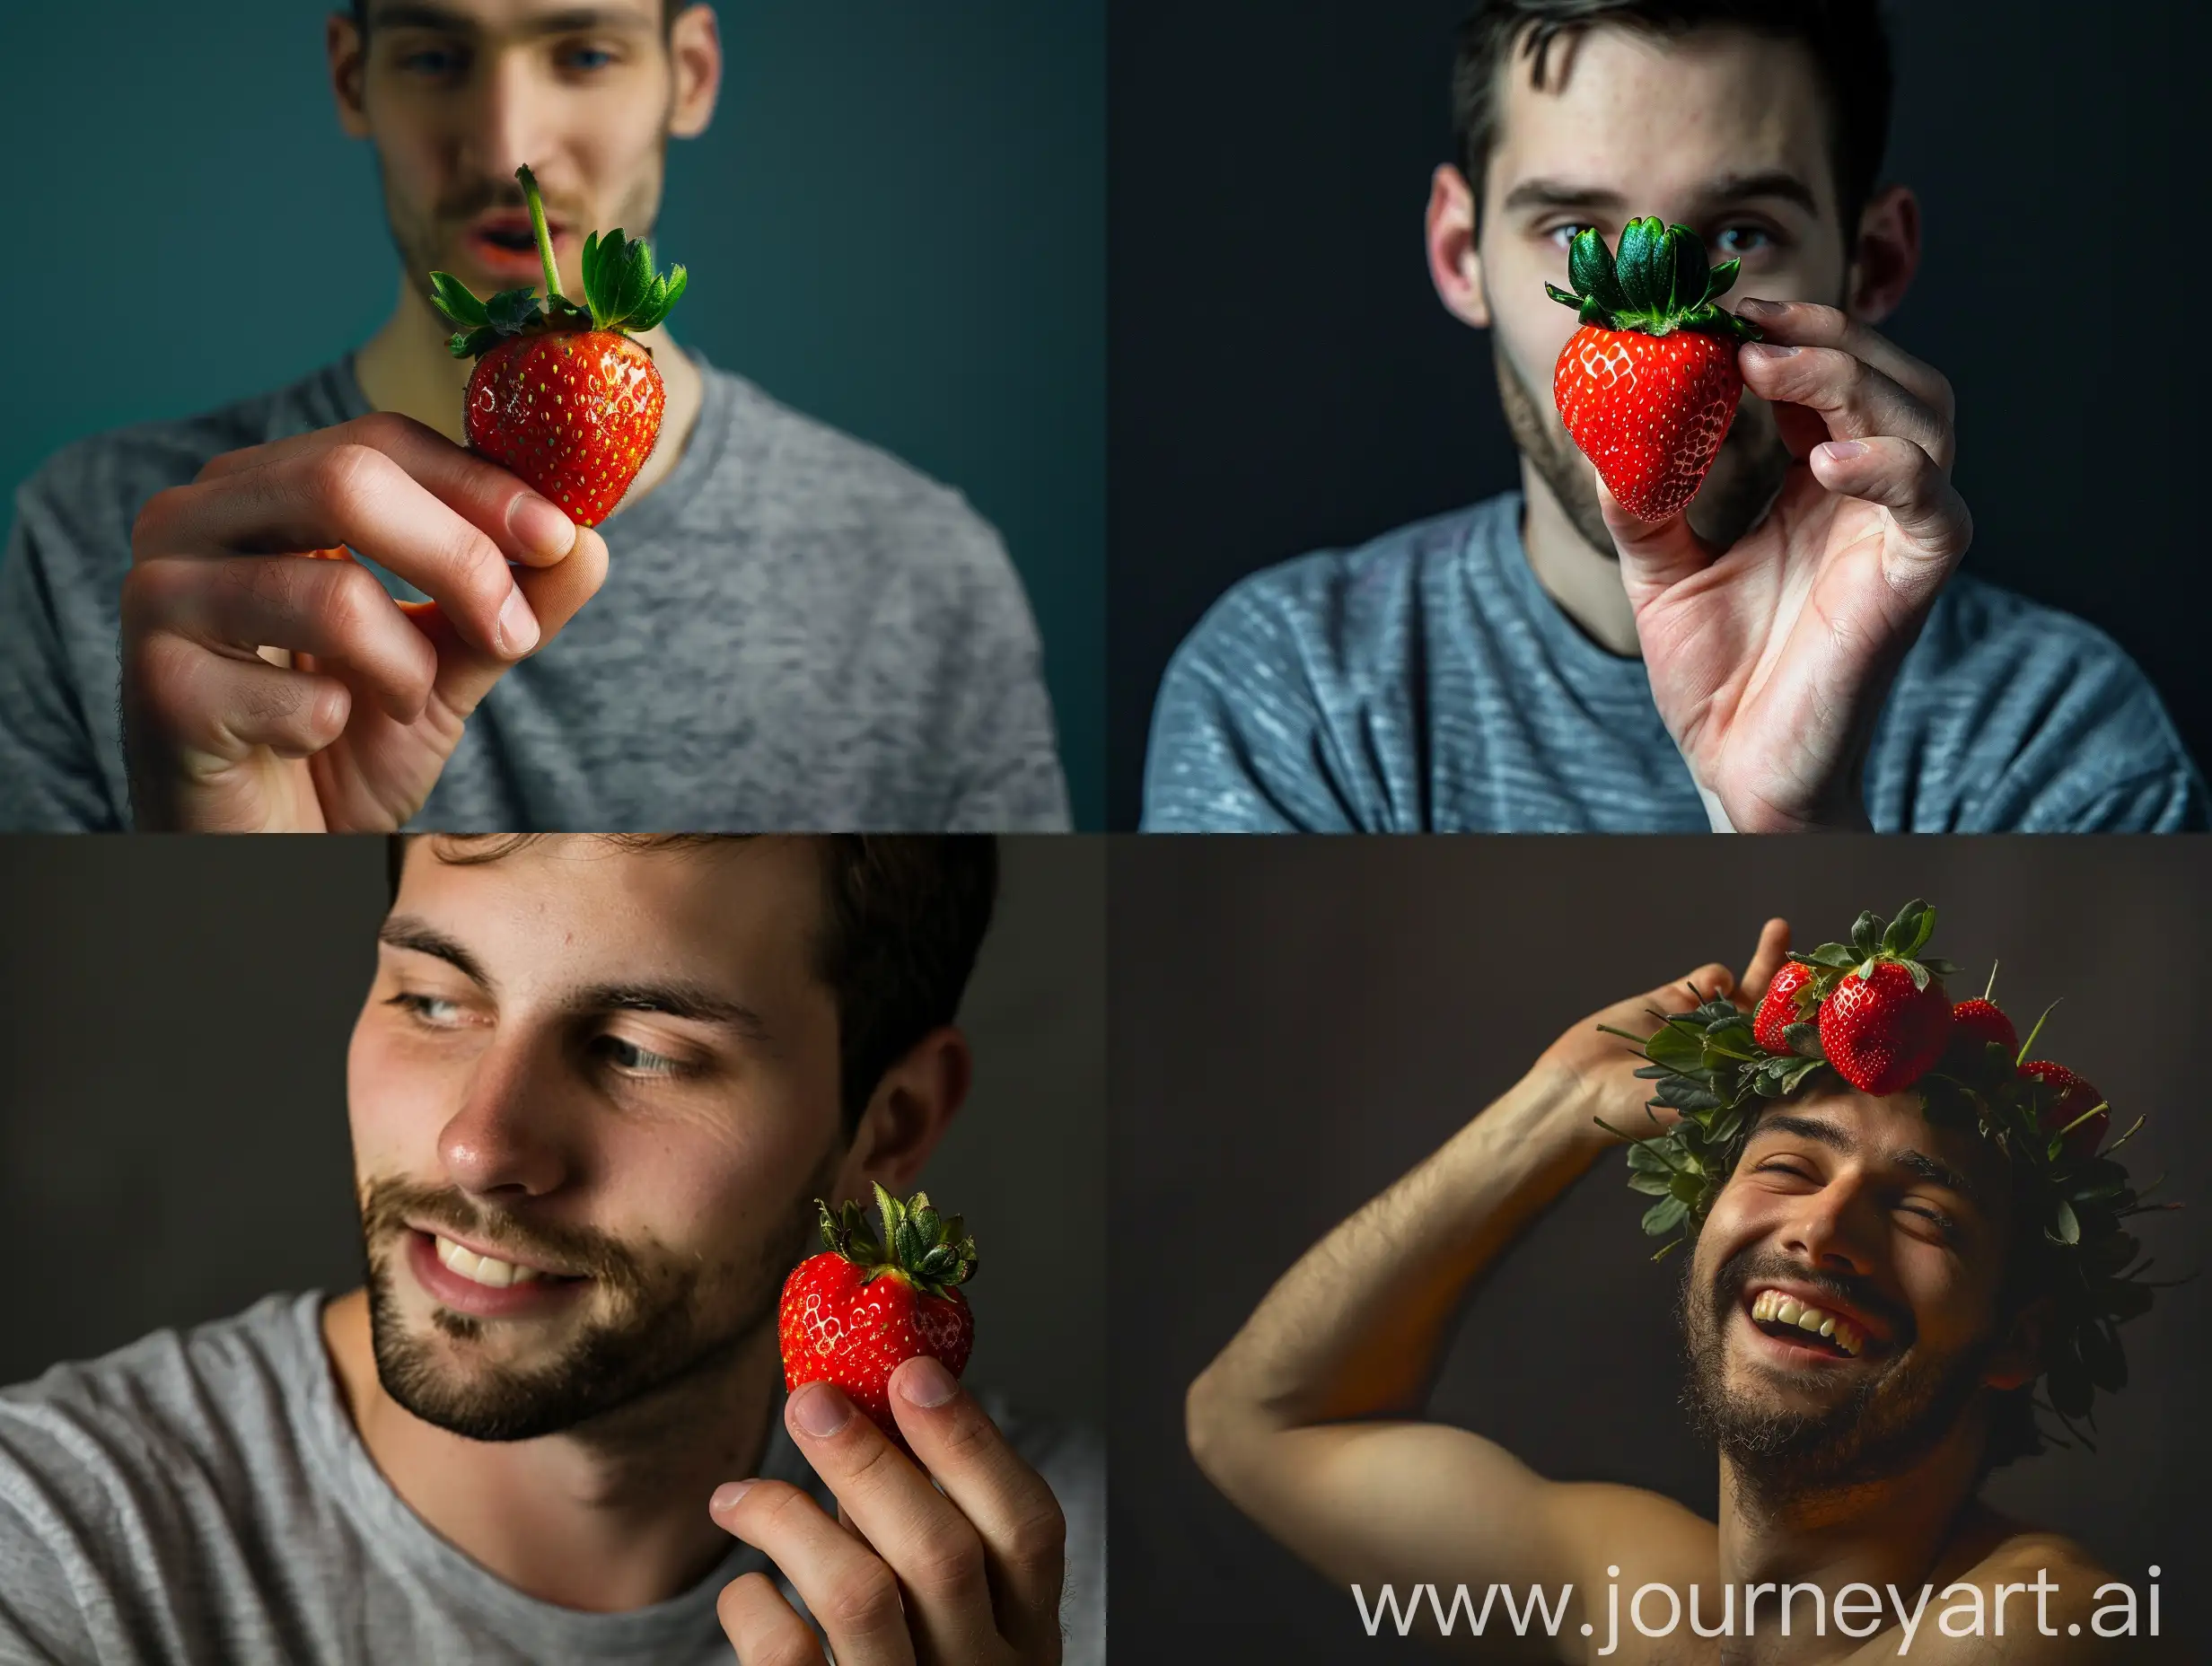 Studio-Photography-Man-Poses-with-Strawberry-in-43-Aspect-Ratio